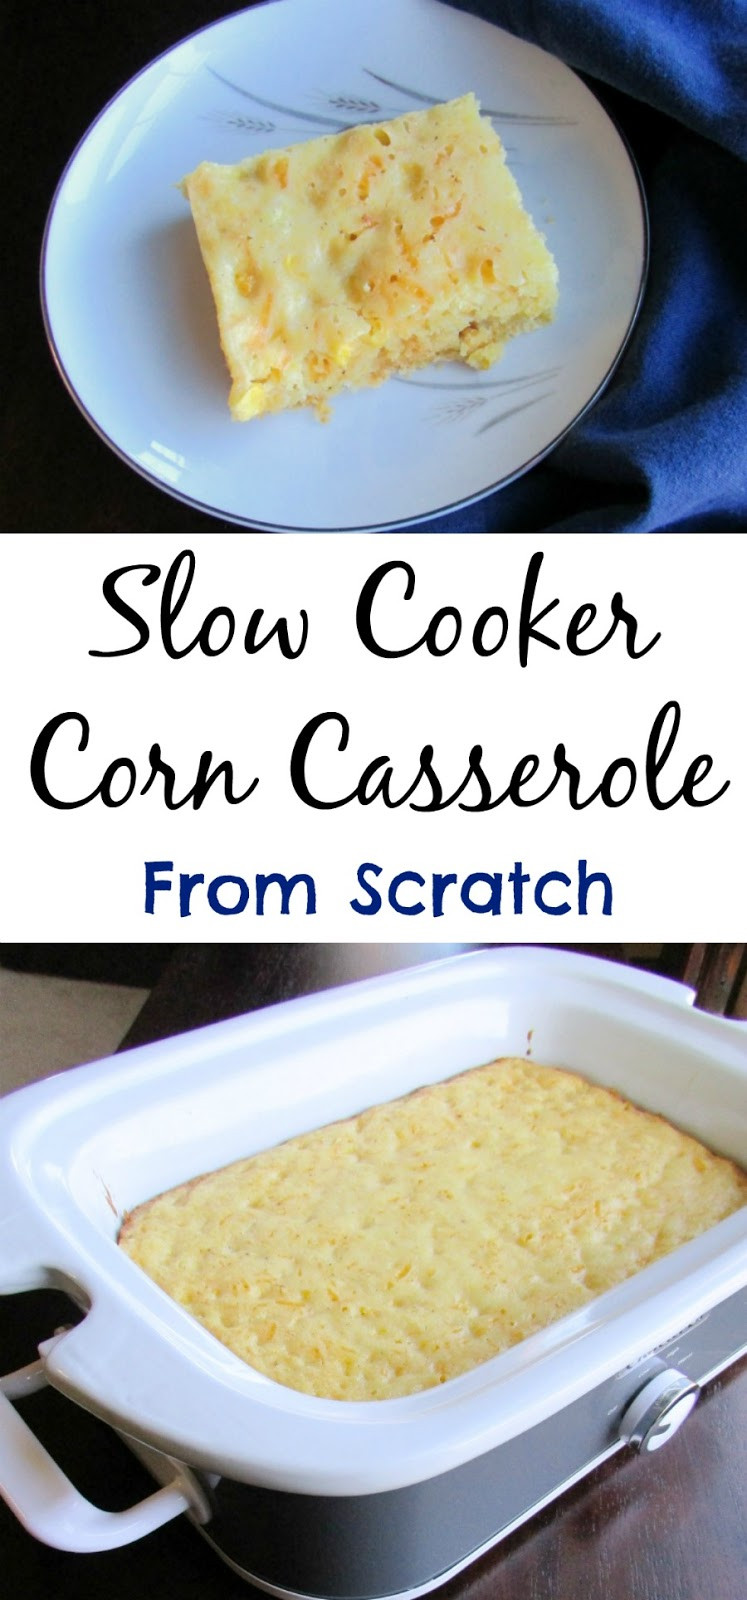 Slow Cooker Corn Casserole
 Cooking With Carlee Slow Cooker Corn Casserole From Scratch